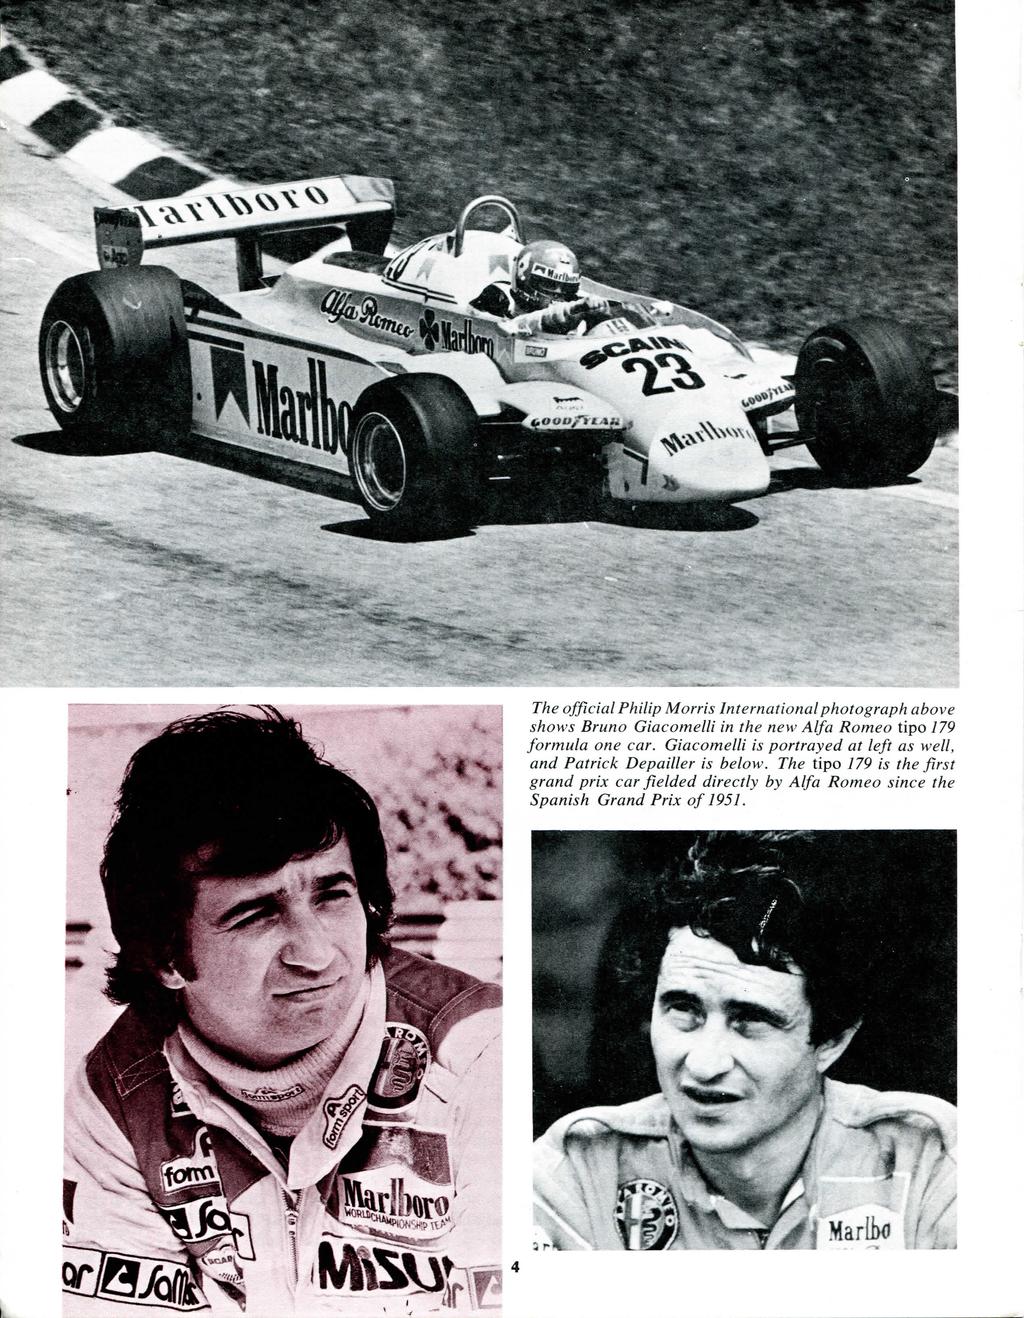 The official Philip Morris International photograph above shows Bruno Giacomelli in the new Alfa Romeo tipo 779 formula one car.